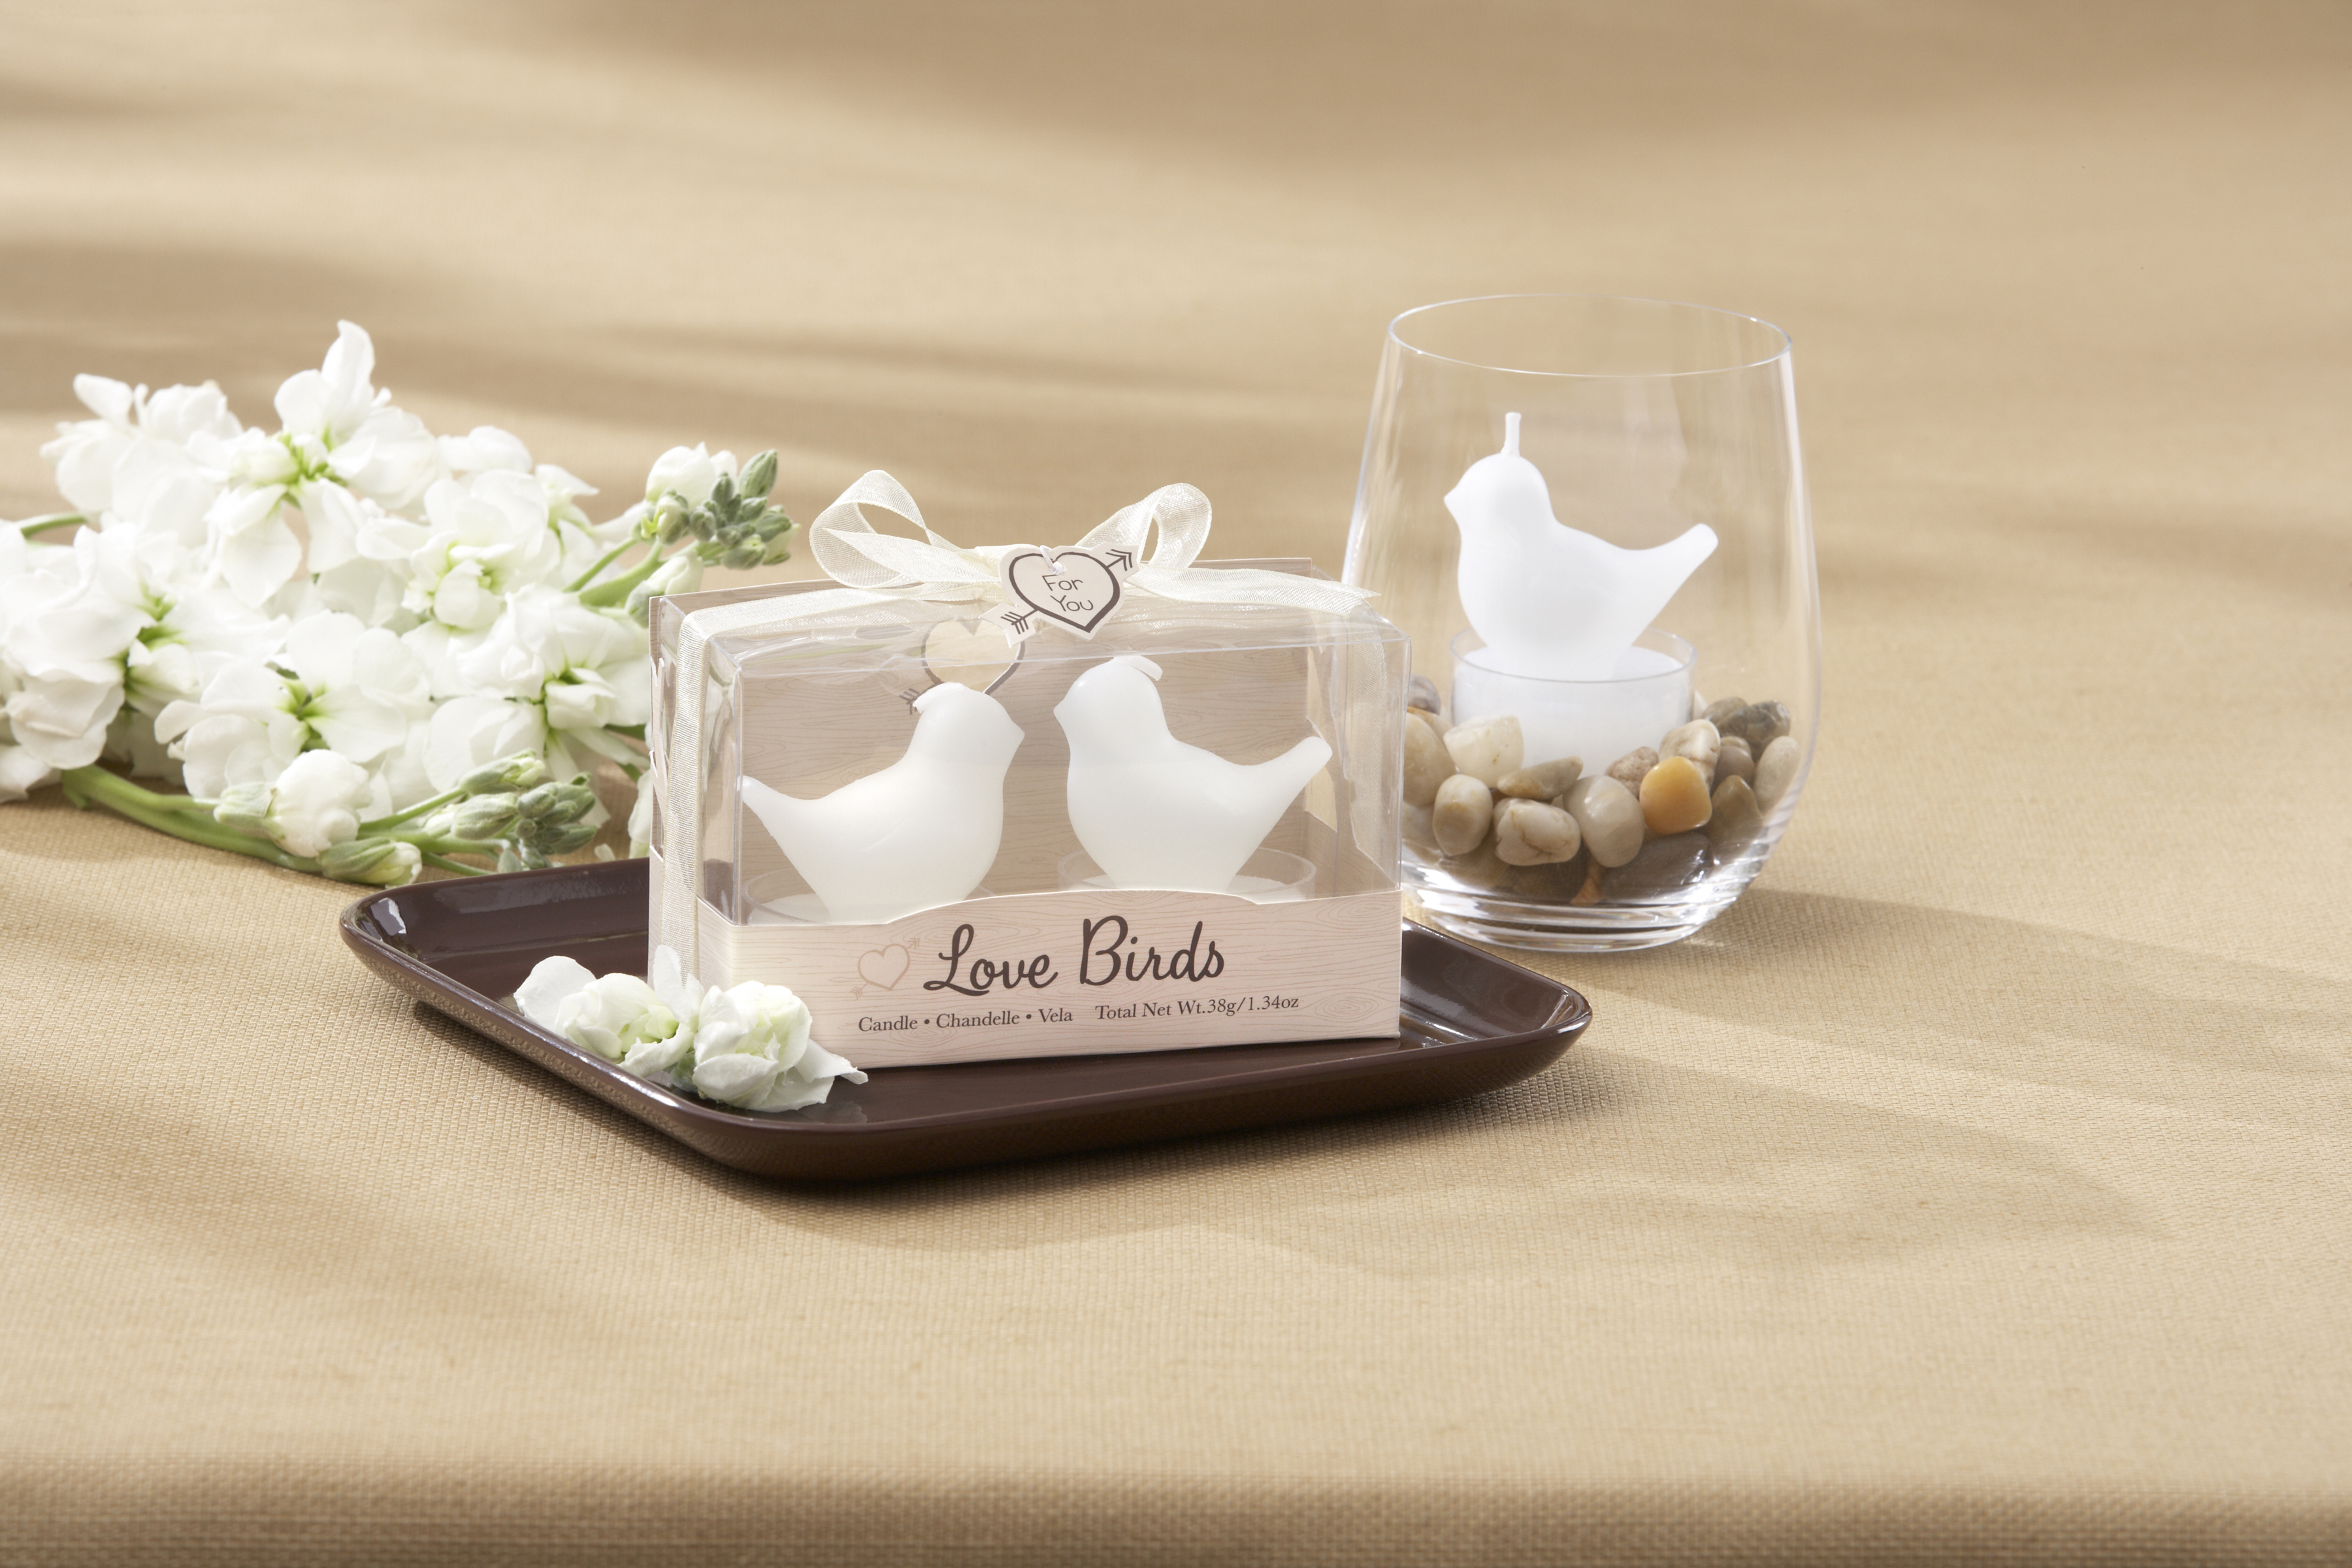 Rustic Wedding Favors By Kate Aspen  Rustic Wedding Chic